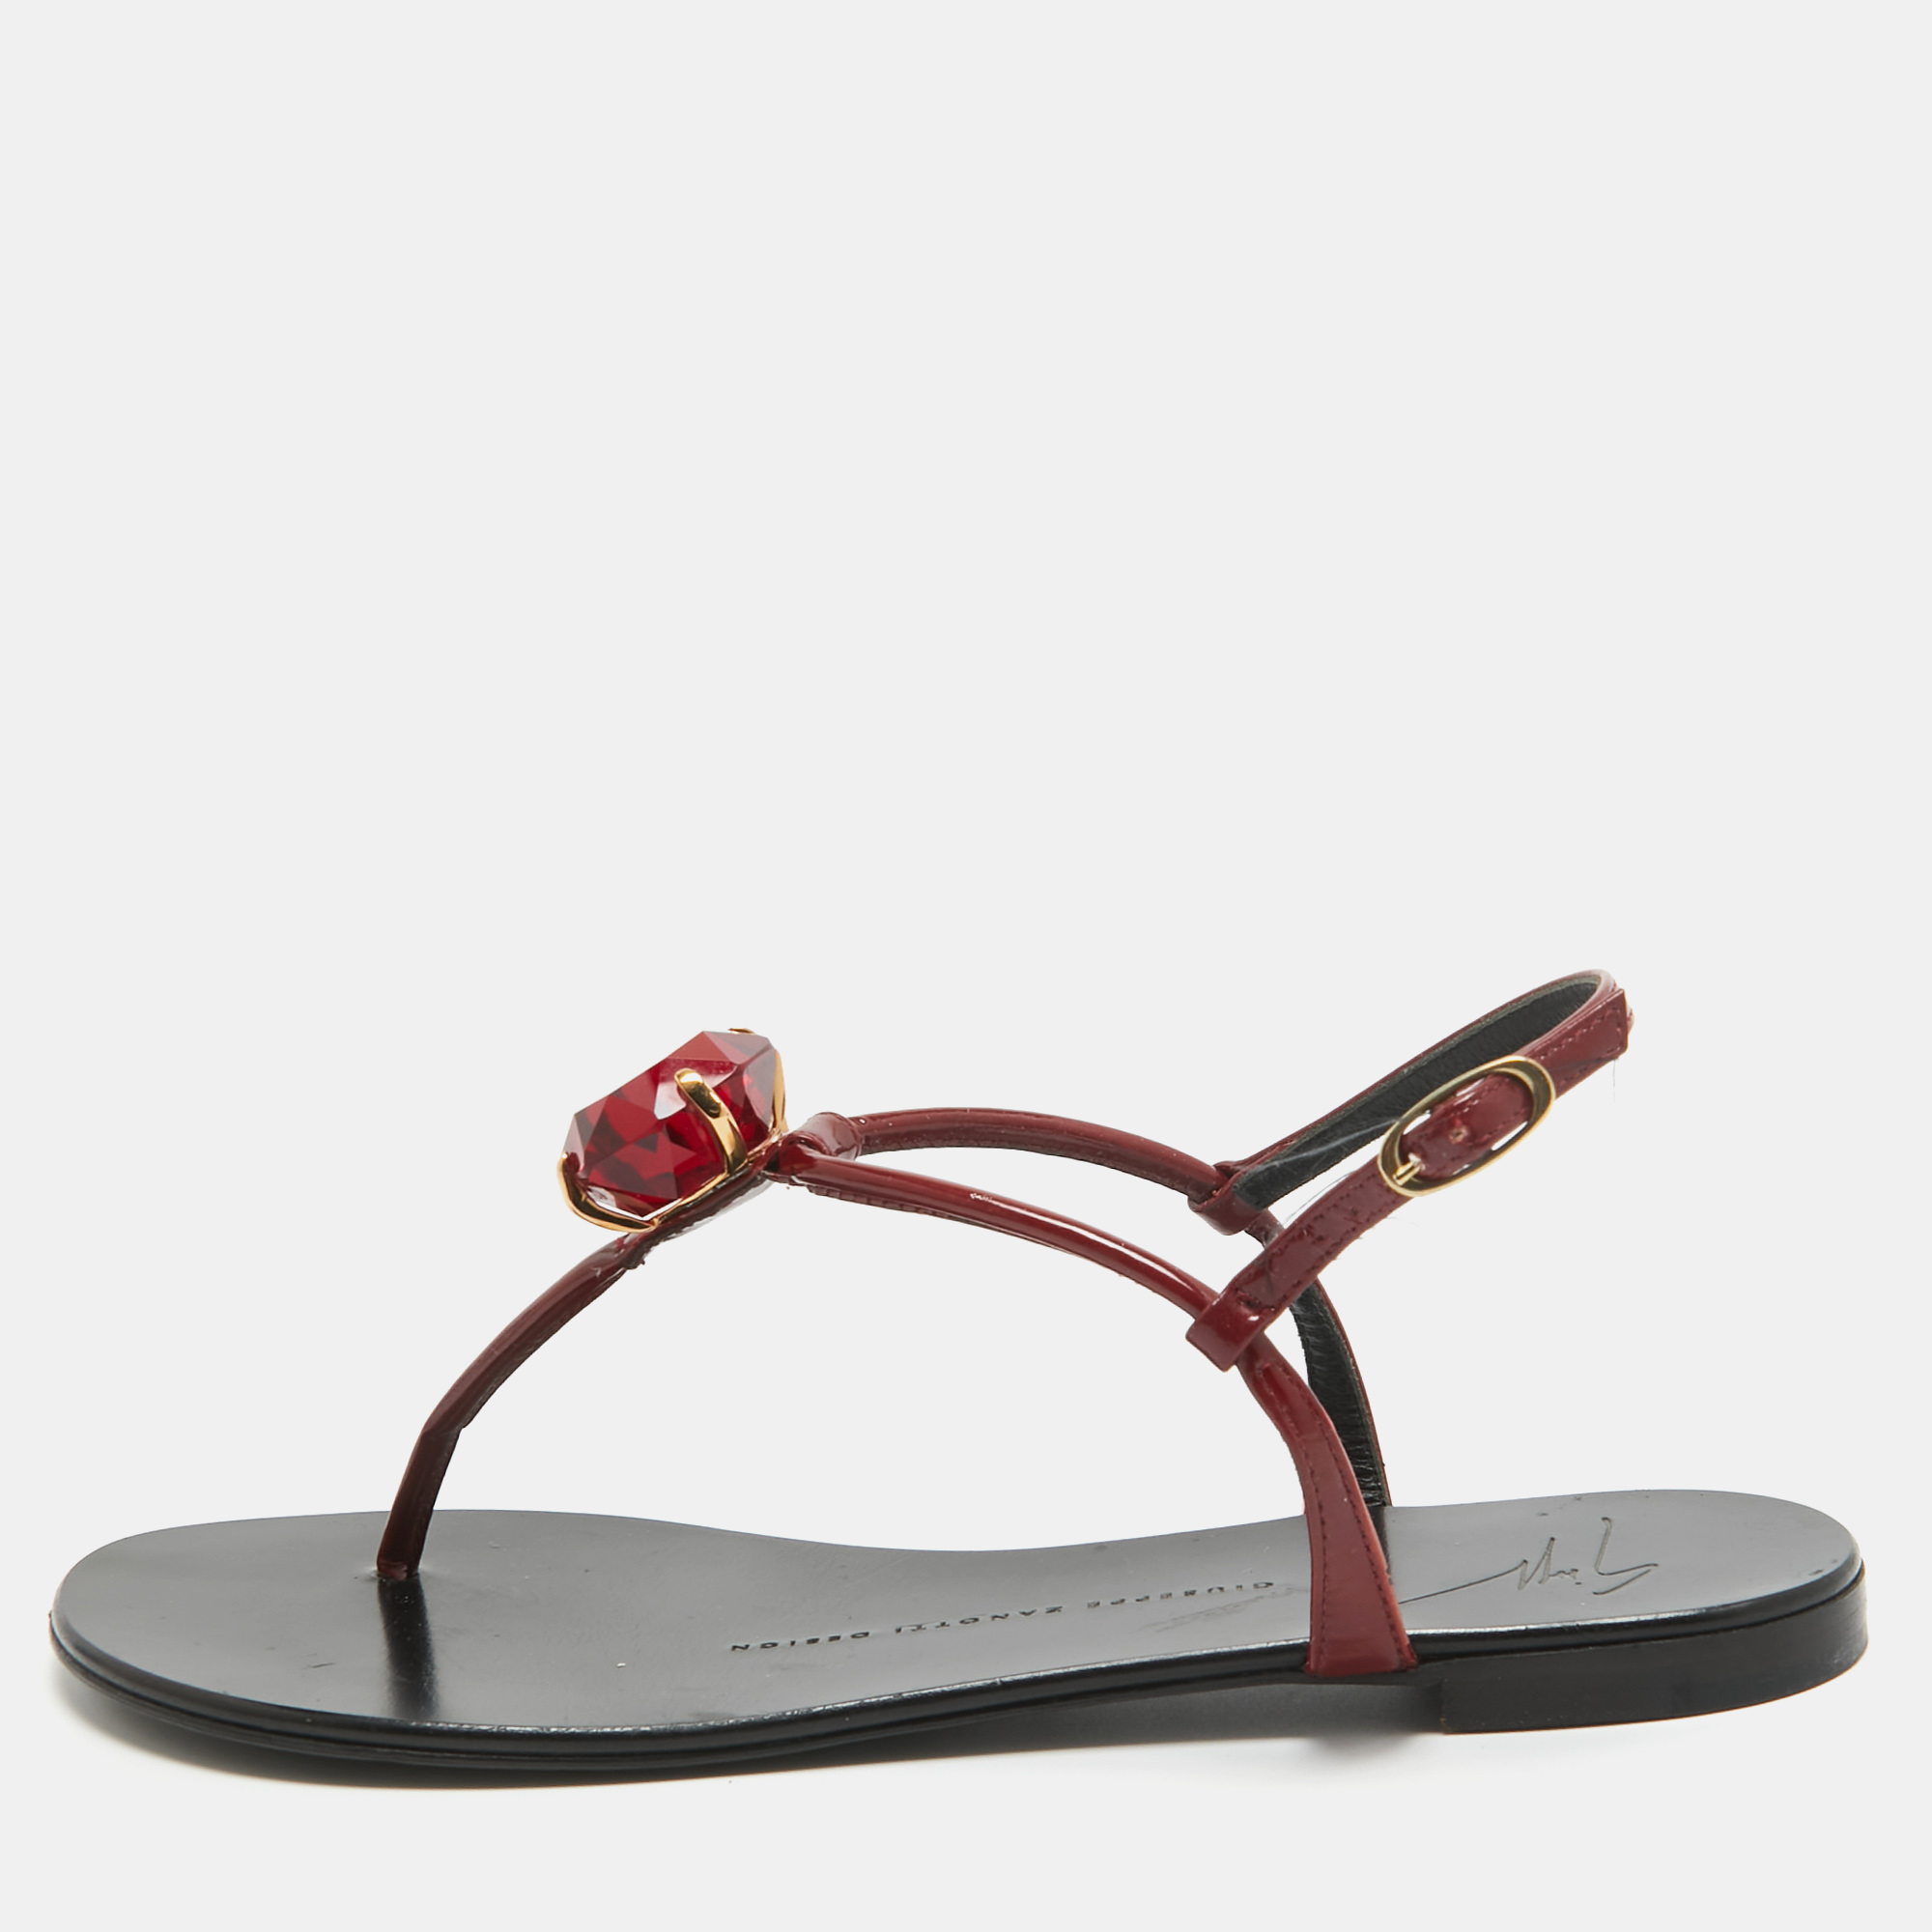 Pre-owned Giuseppe Zanotti Burgundy Patent Leather Crystal Embellished Thong Flat Sandals Size 37